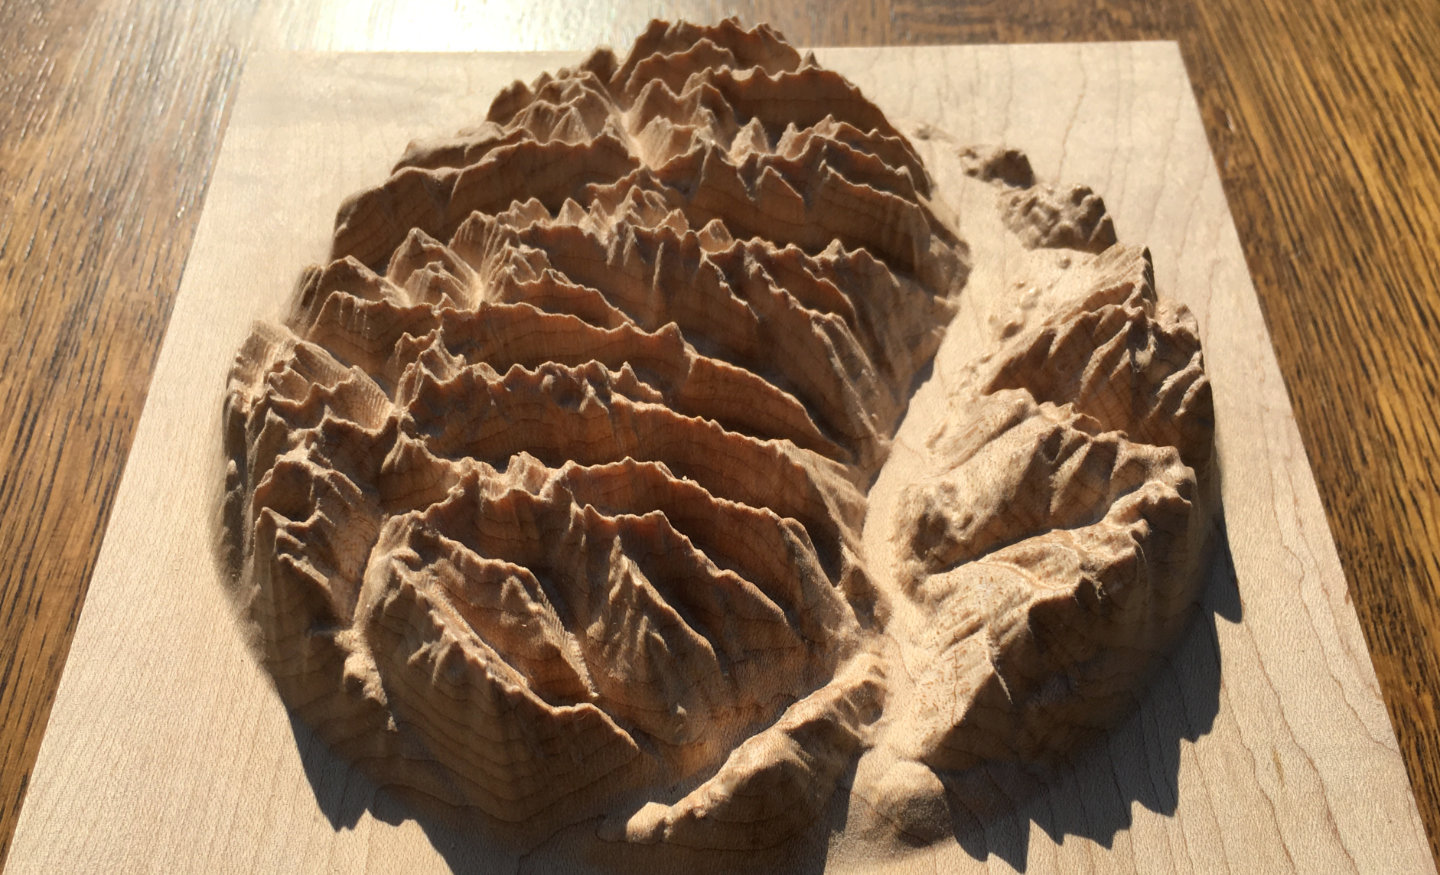 three-dimensional wood-carved relief map of the mountains of Valhalla in the Kootenays, British Columbia, Canada